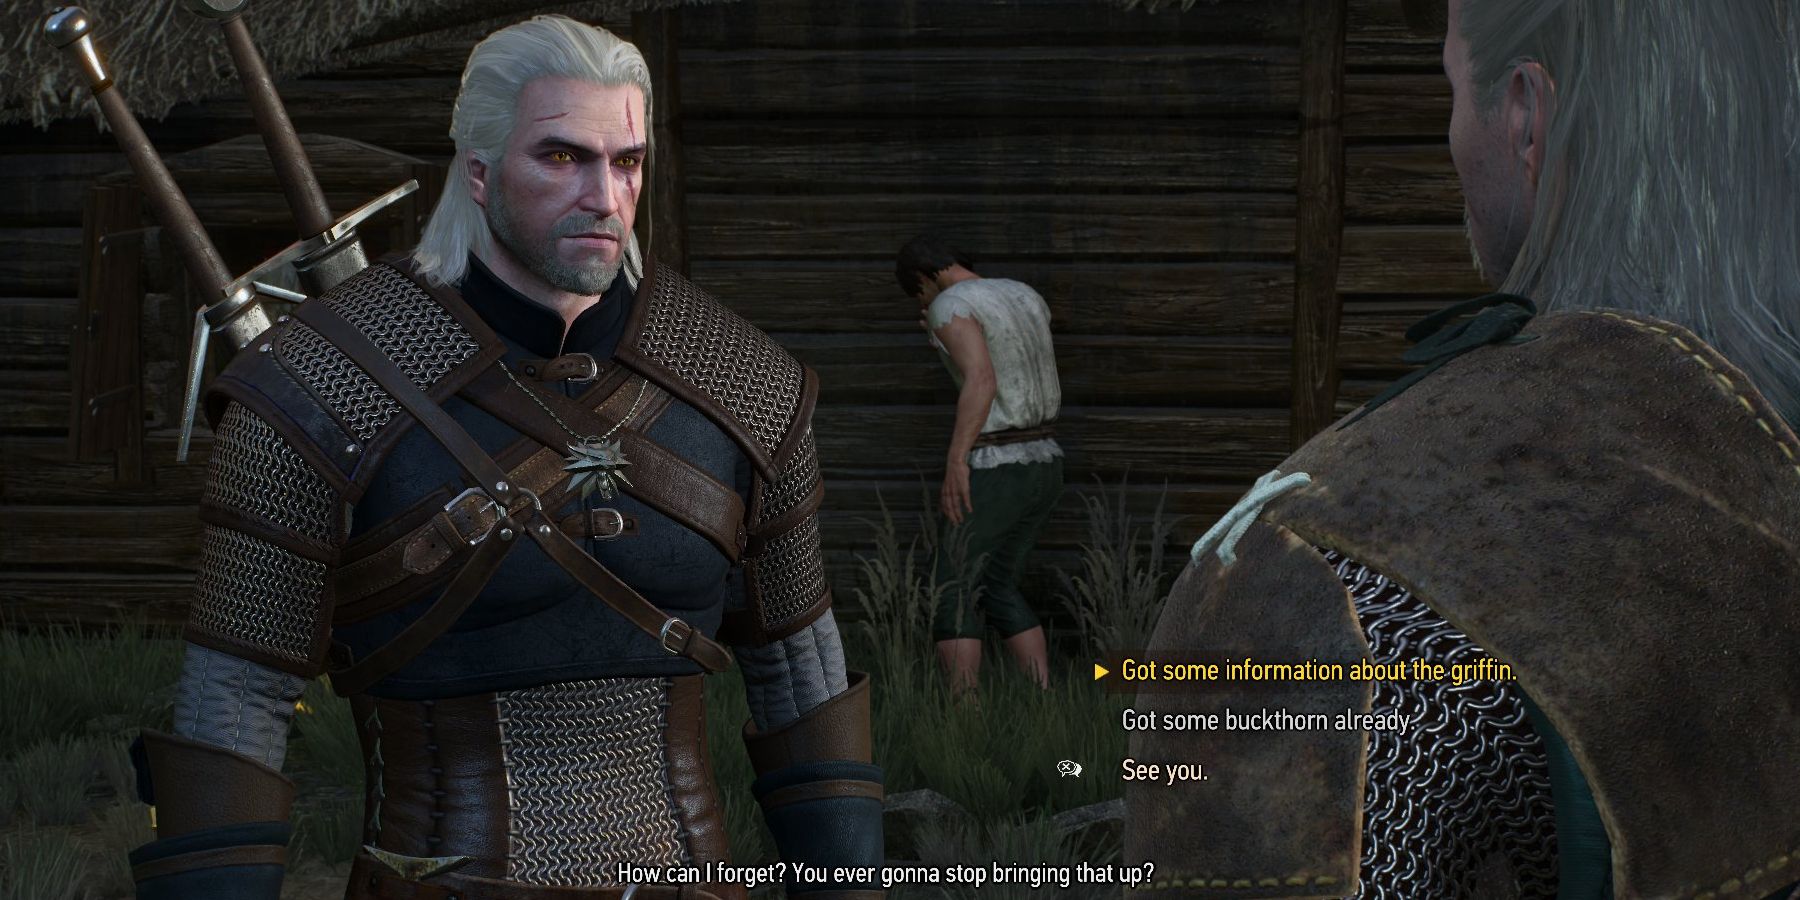 The Witcher 3 Geralt informing Vesemir about the Griffin